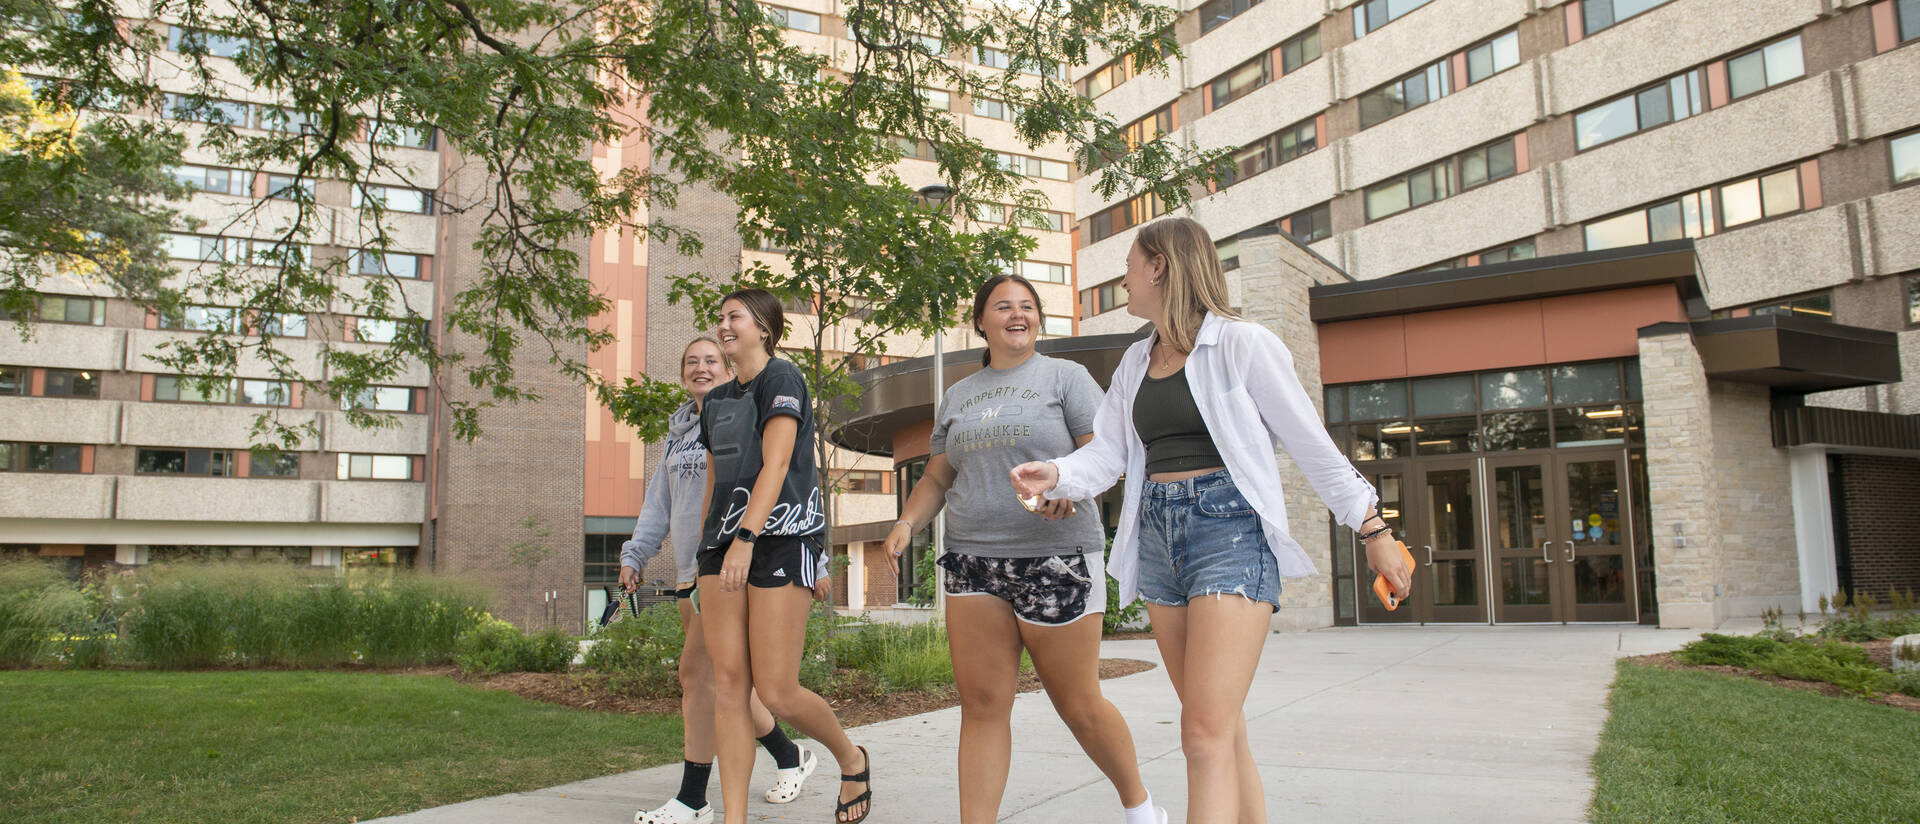 Students walk together out of a residence hall on a sidewalk.